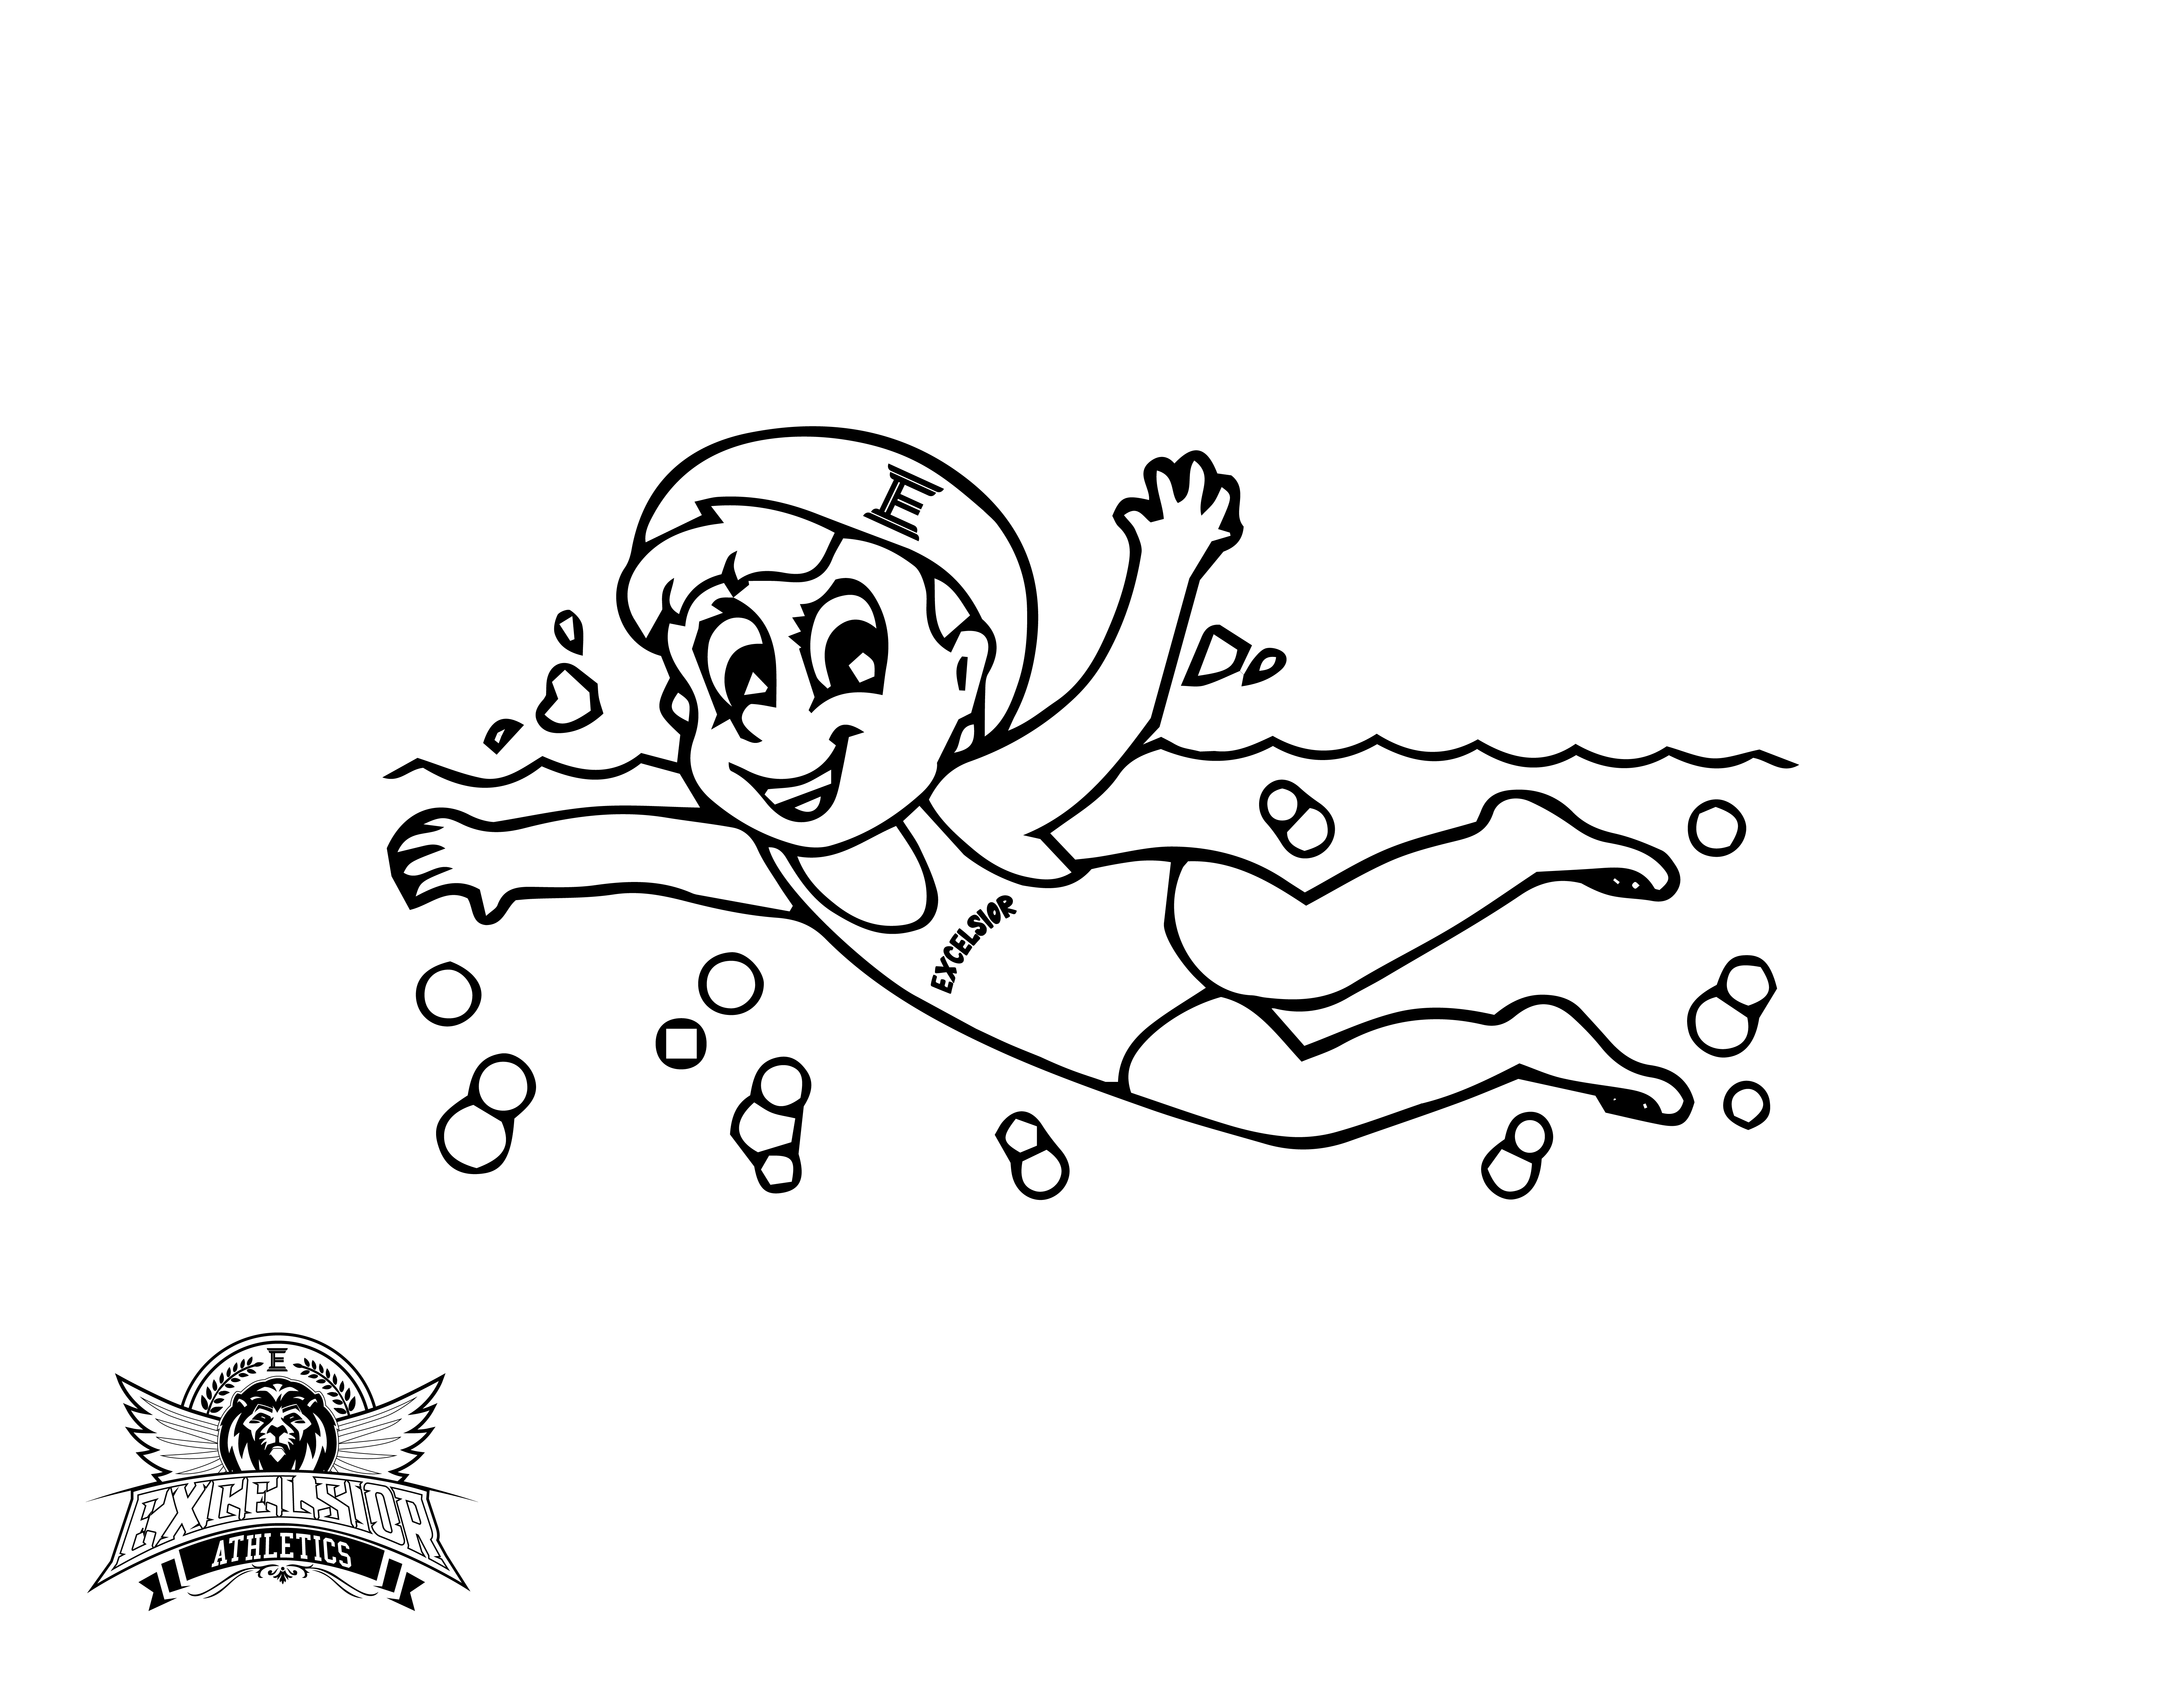 Coloring pages â excelsior classical academy athletics